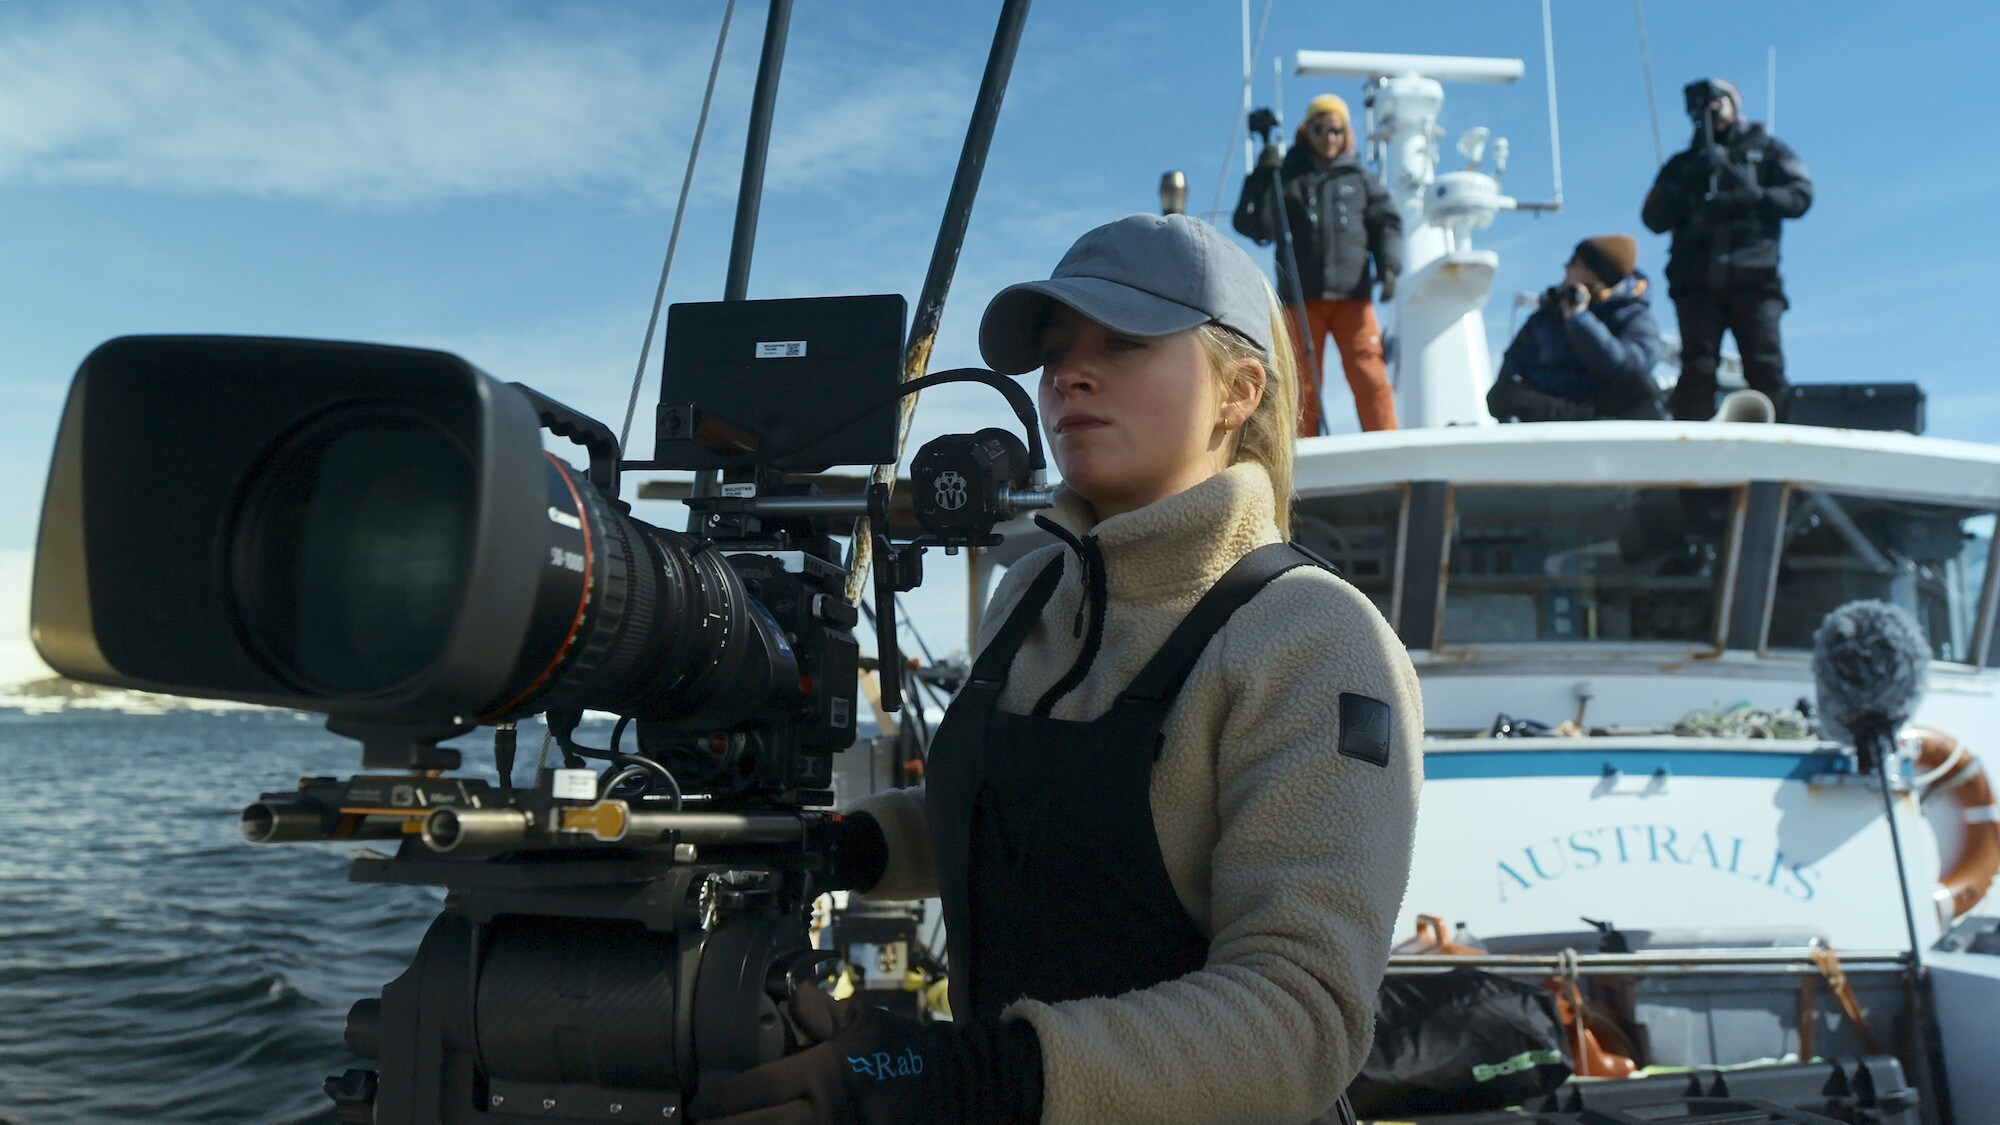 Anna Dimitriadis filming from the front of the Australis. (credit: National Geographic for Disney+/Will West)